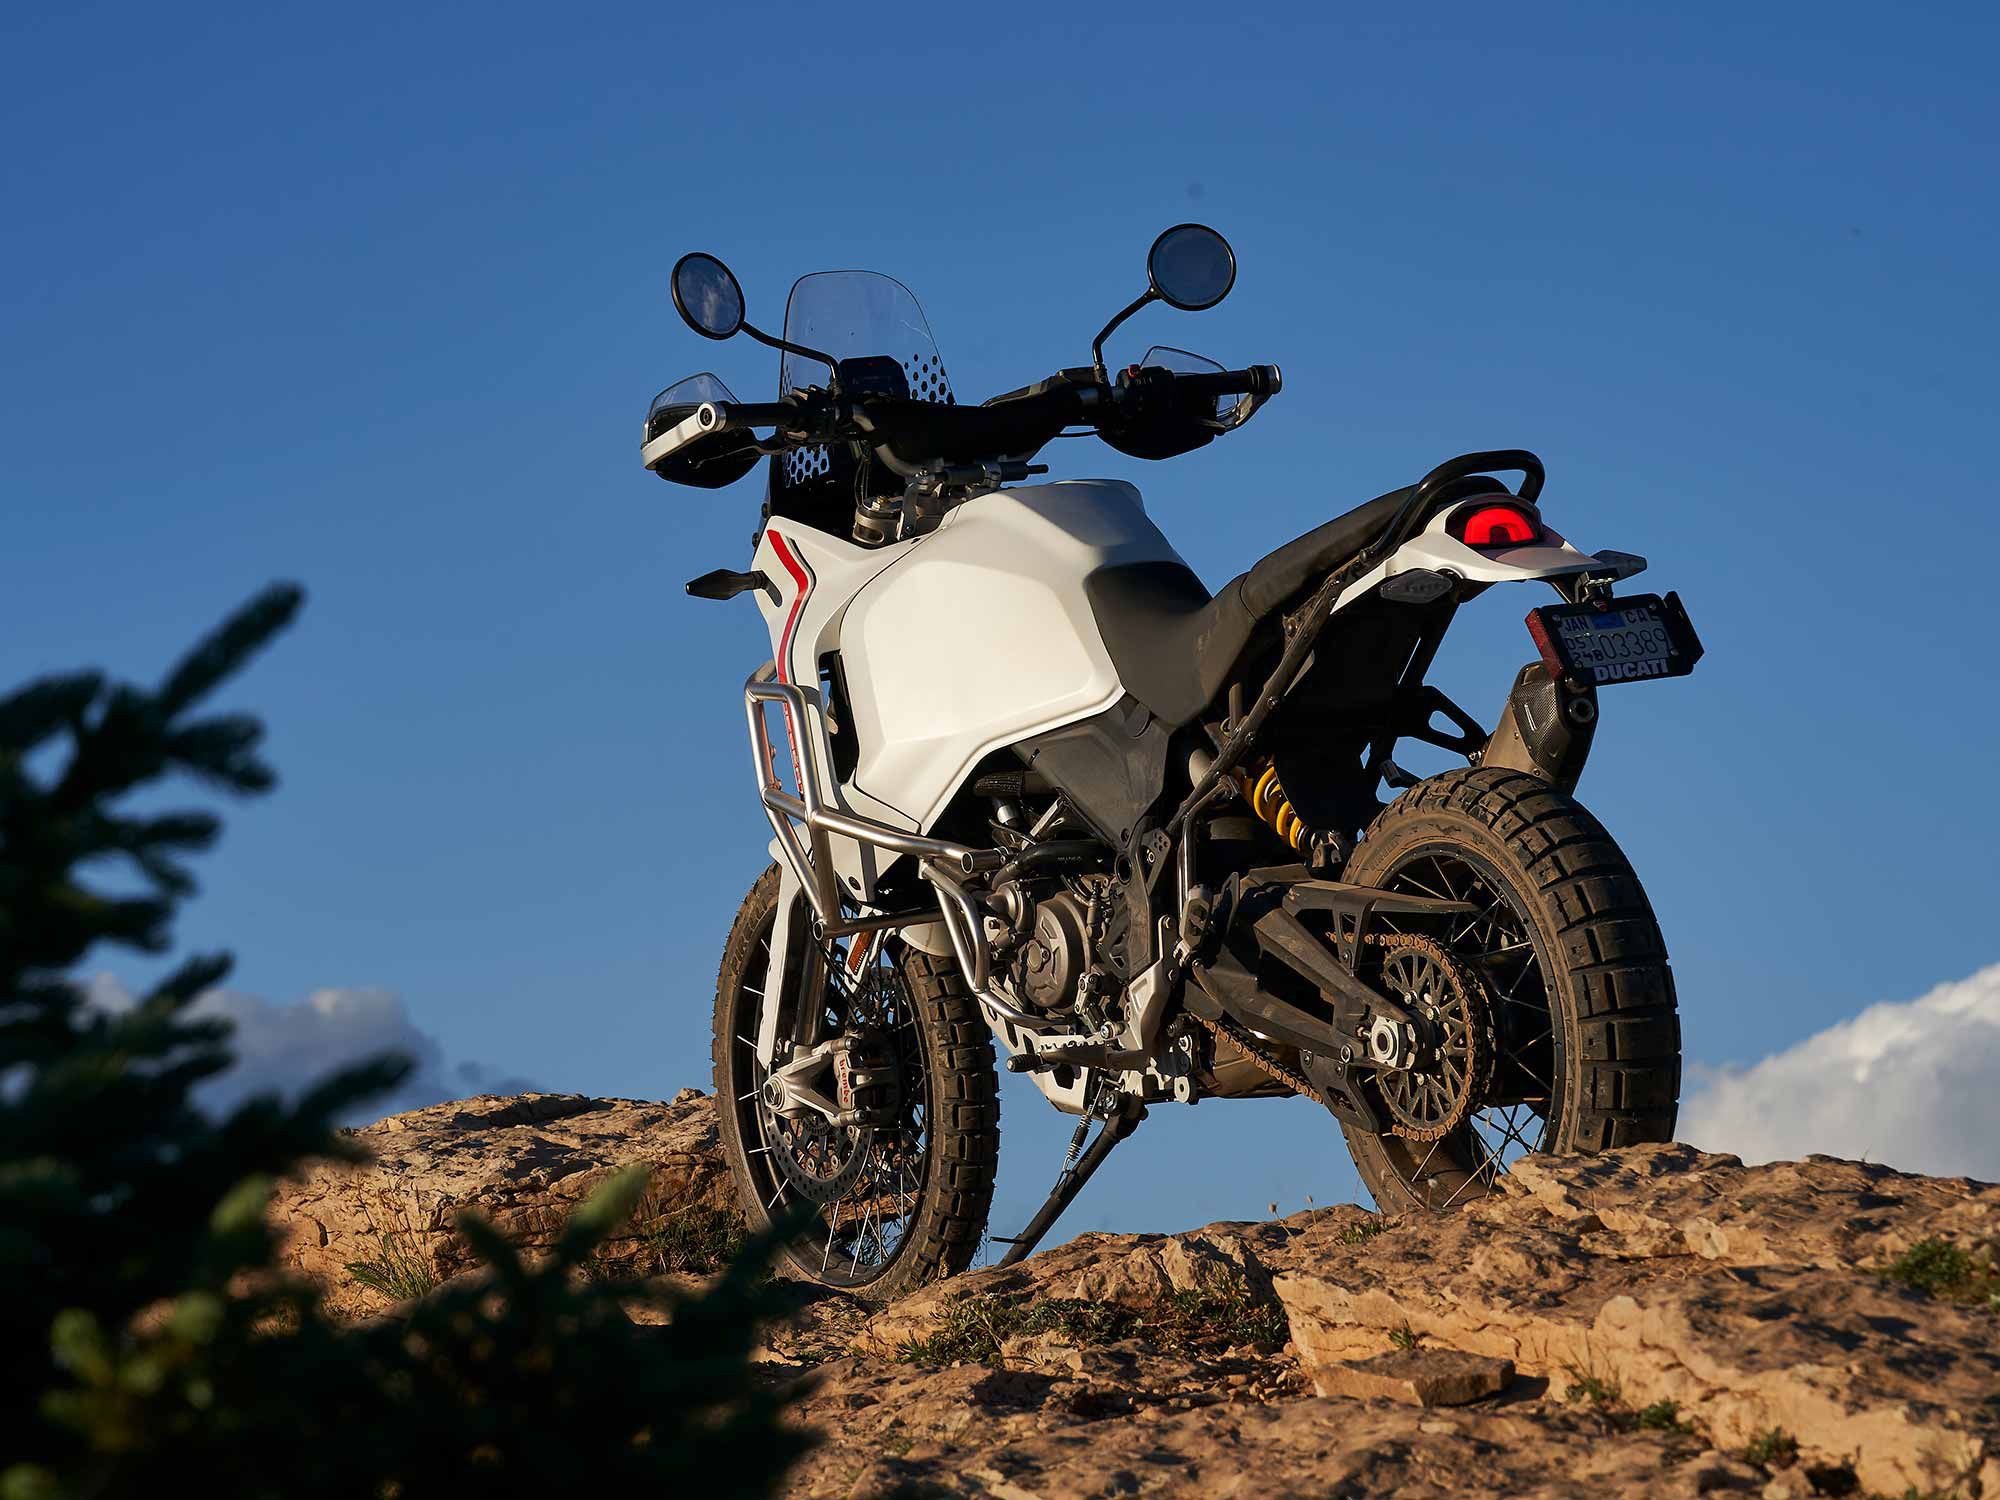 We’re big fans of the DesertX’s styling and overall proportions. It’s easily one of the best-looking bikes in the ADV segment.